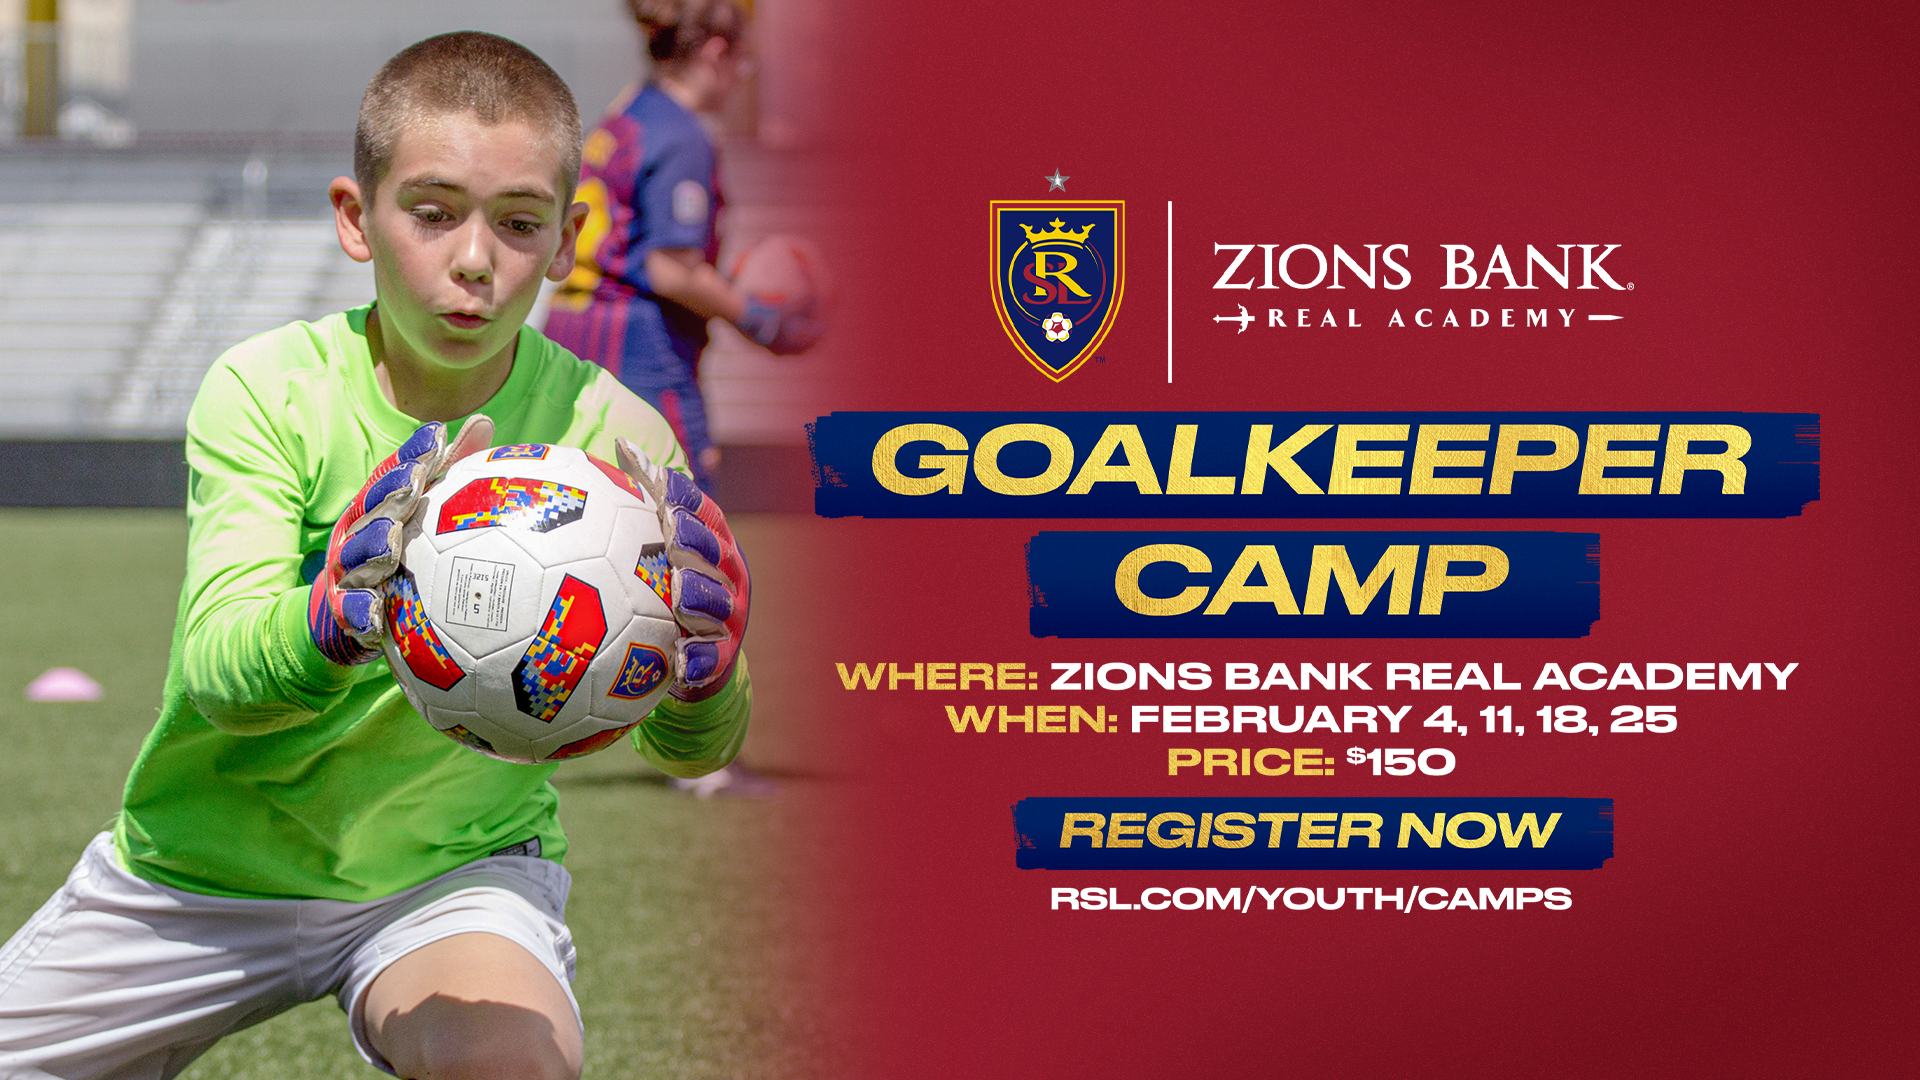 RSL Camps